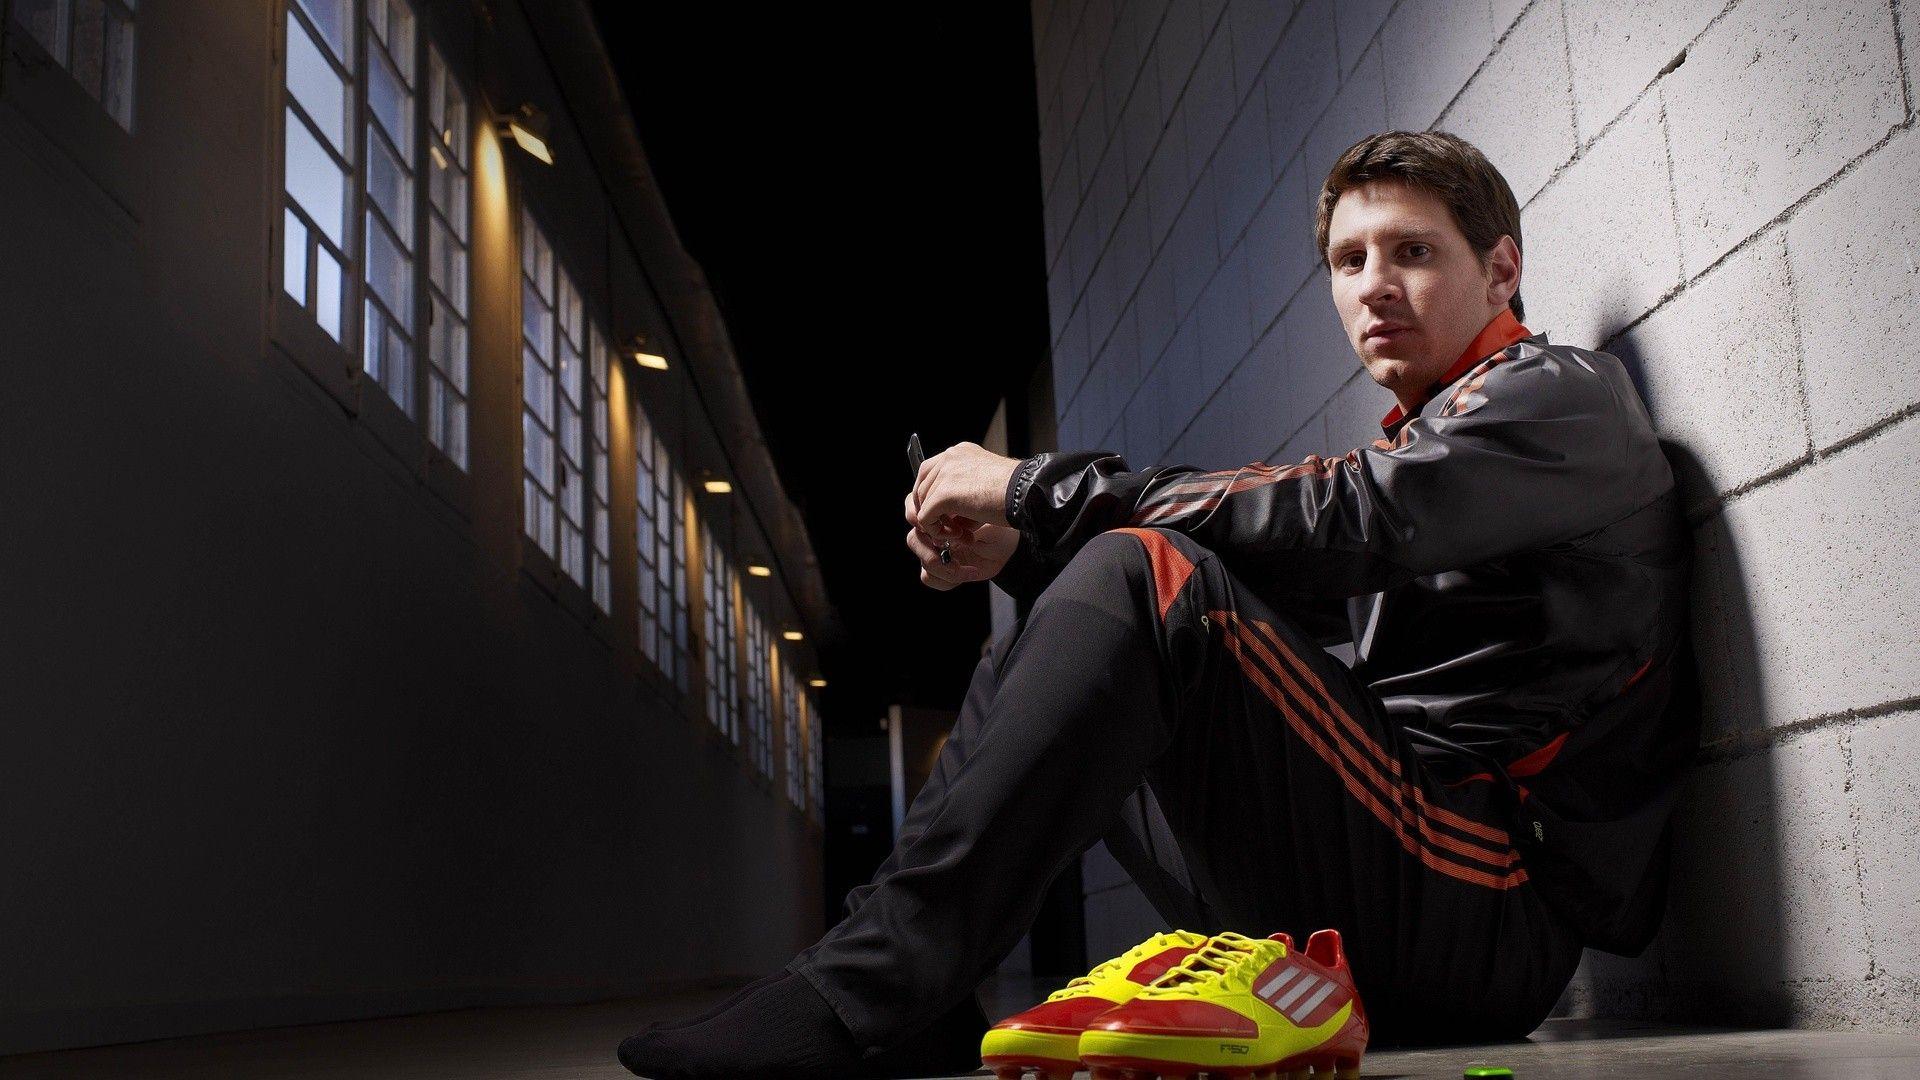 Lionel Messi Adidas Commercial HD Wallpaper. Lionel Messi Adidas